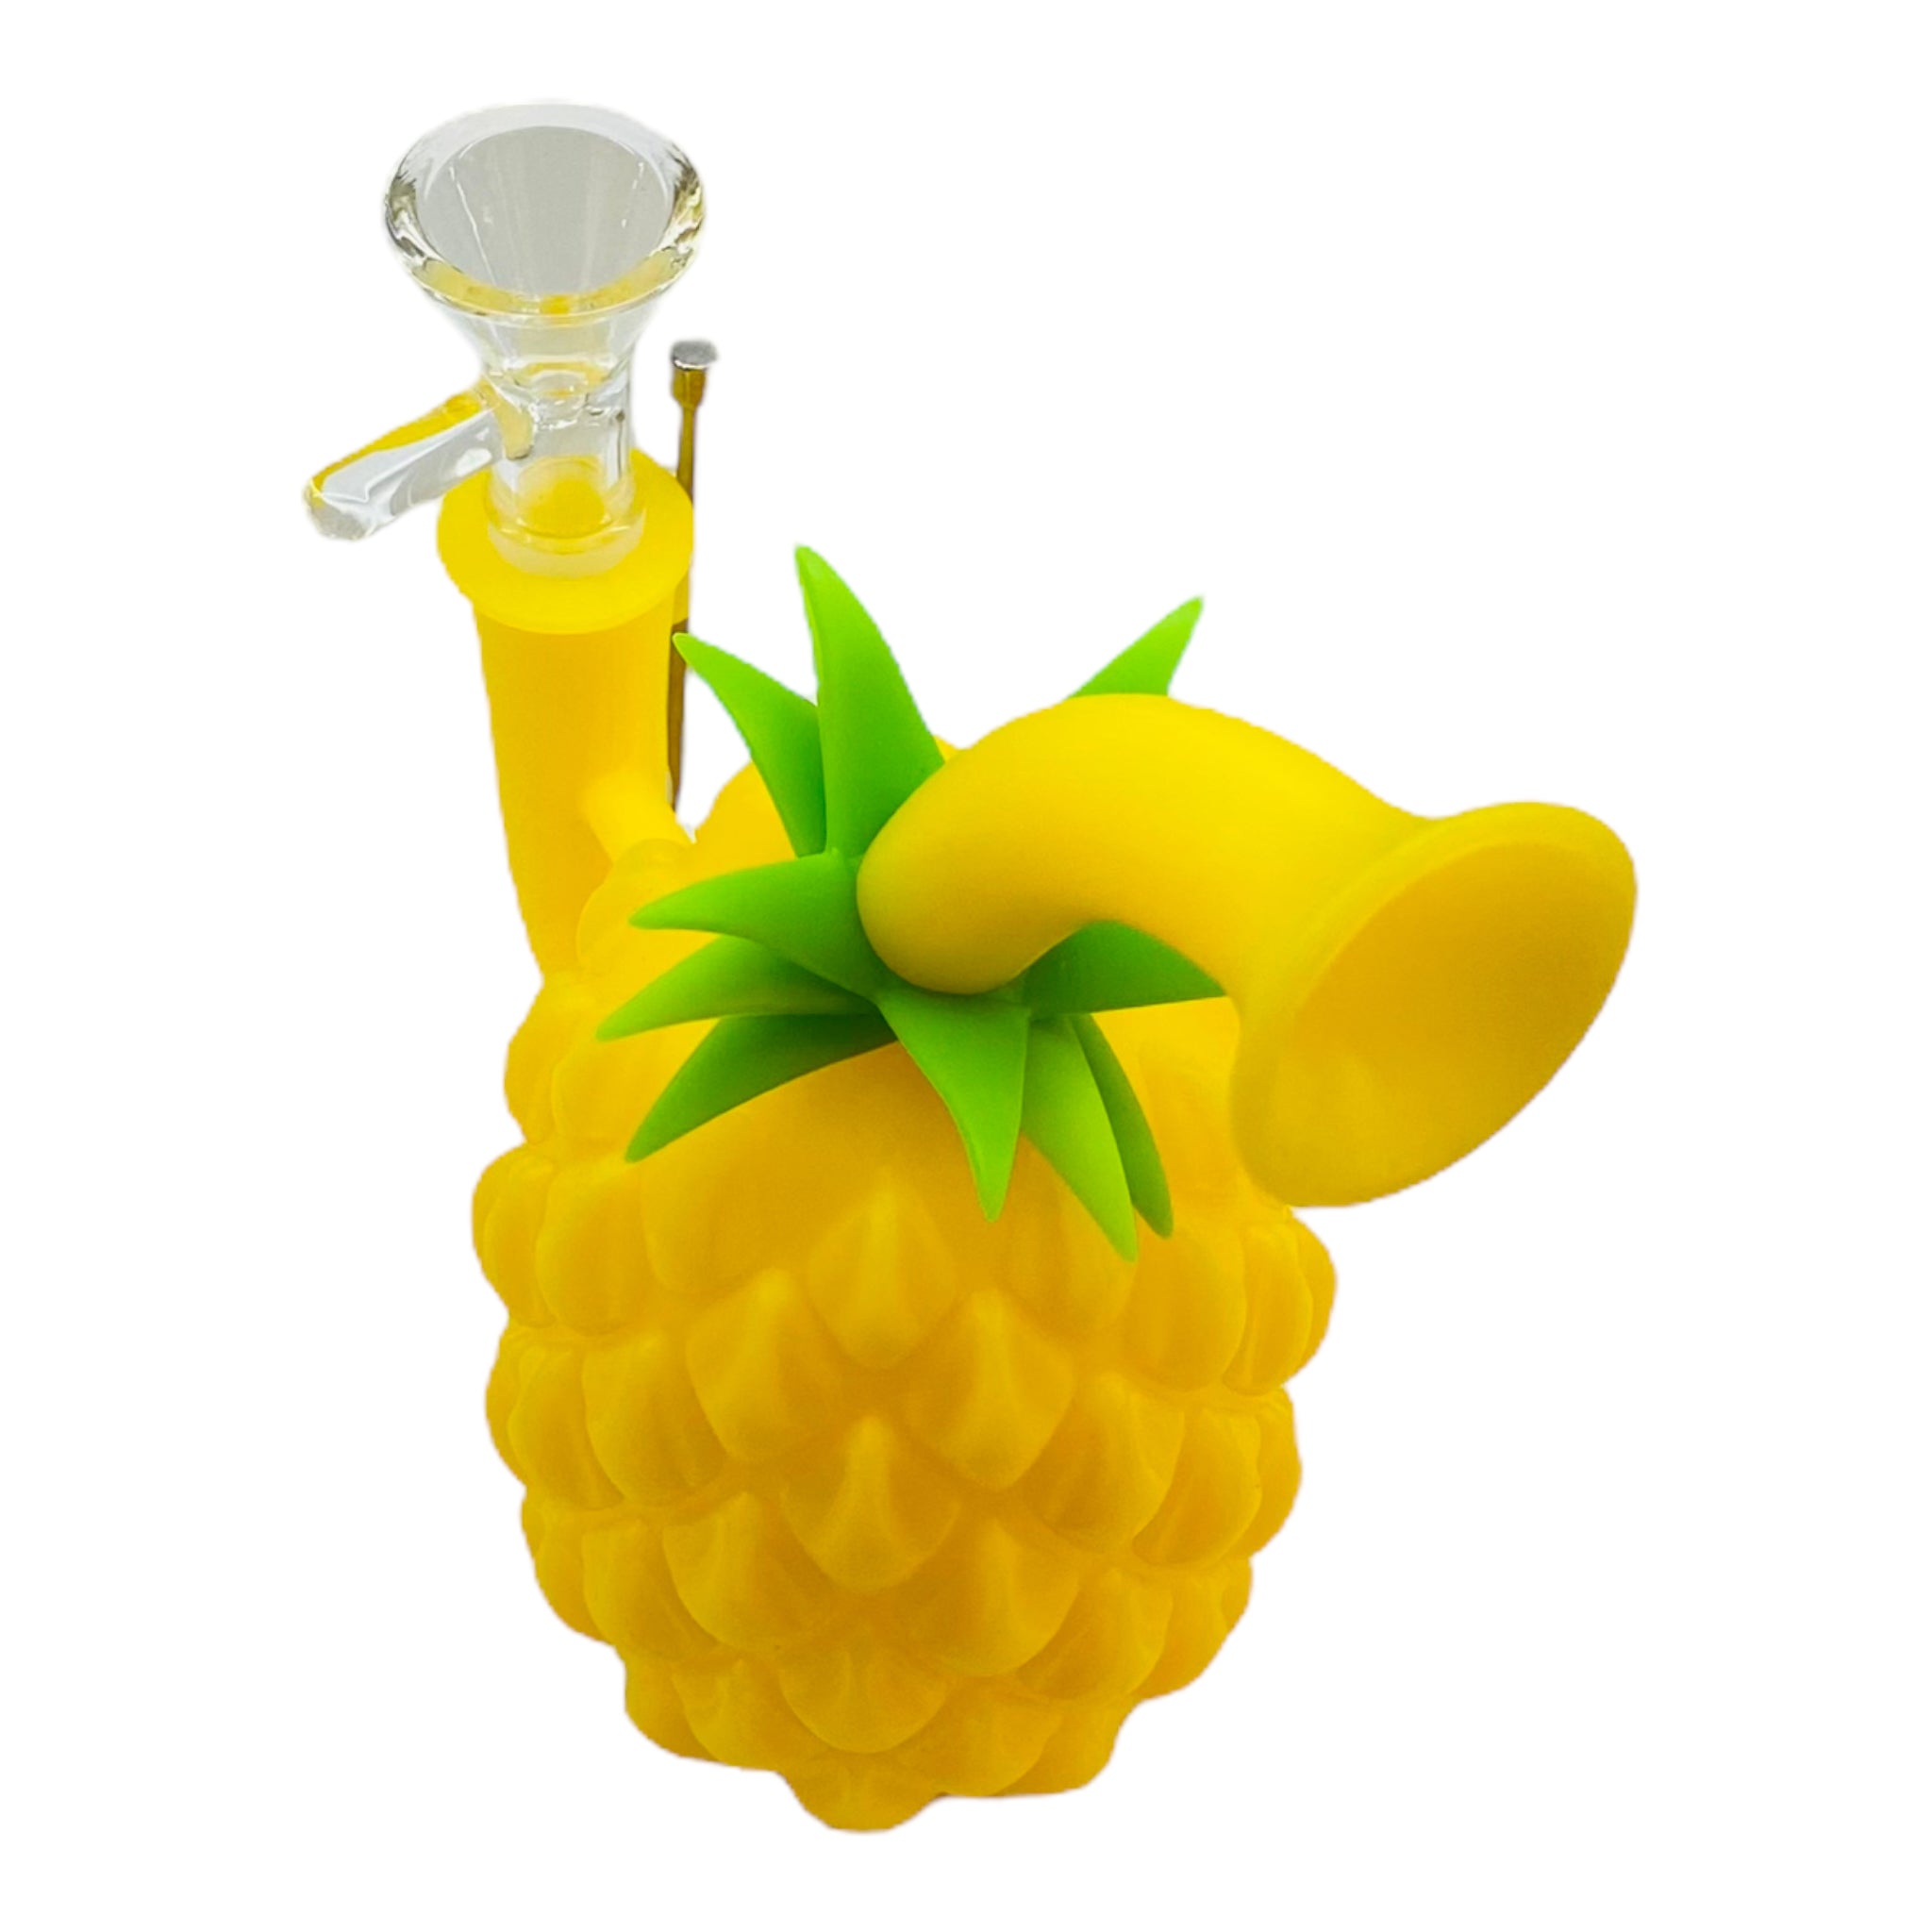 rubber Pineapple Express Silicone Bubbler Bong With Magnetic Tool Holder